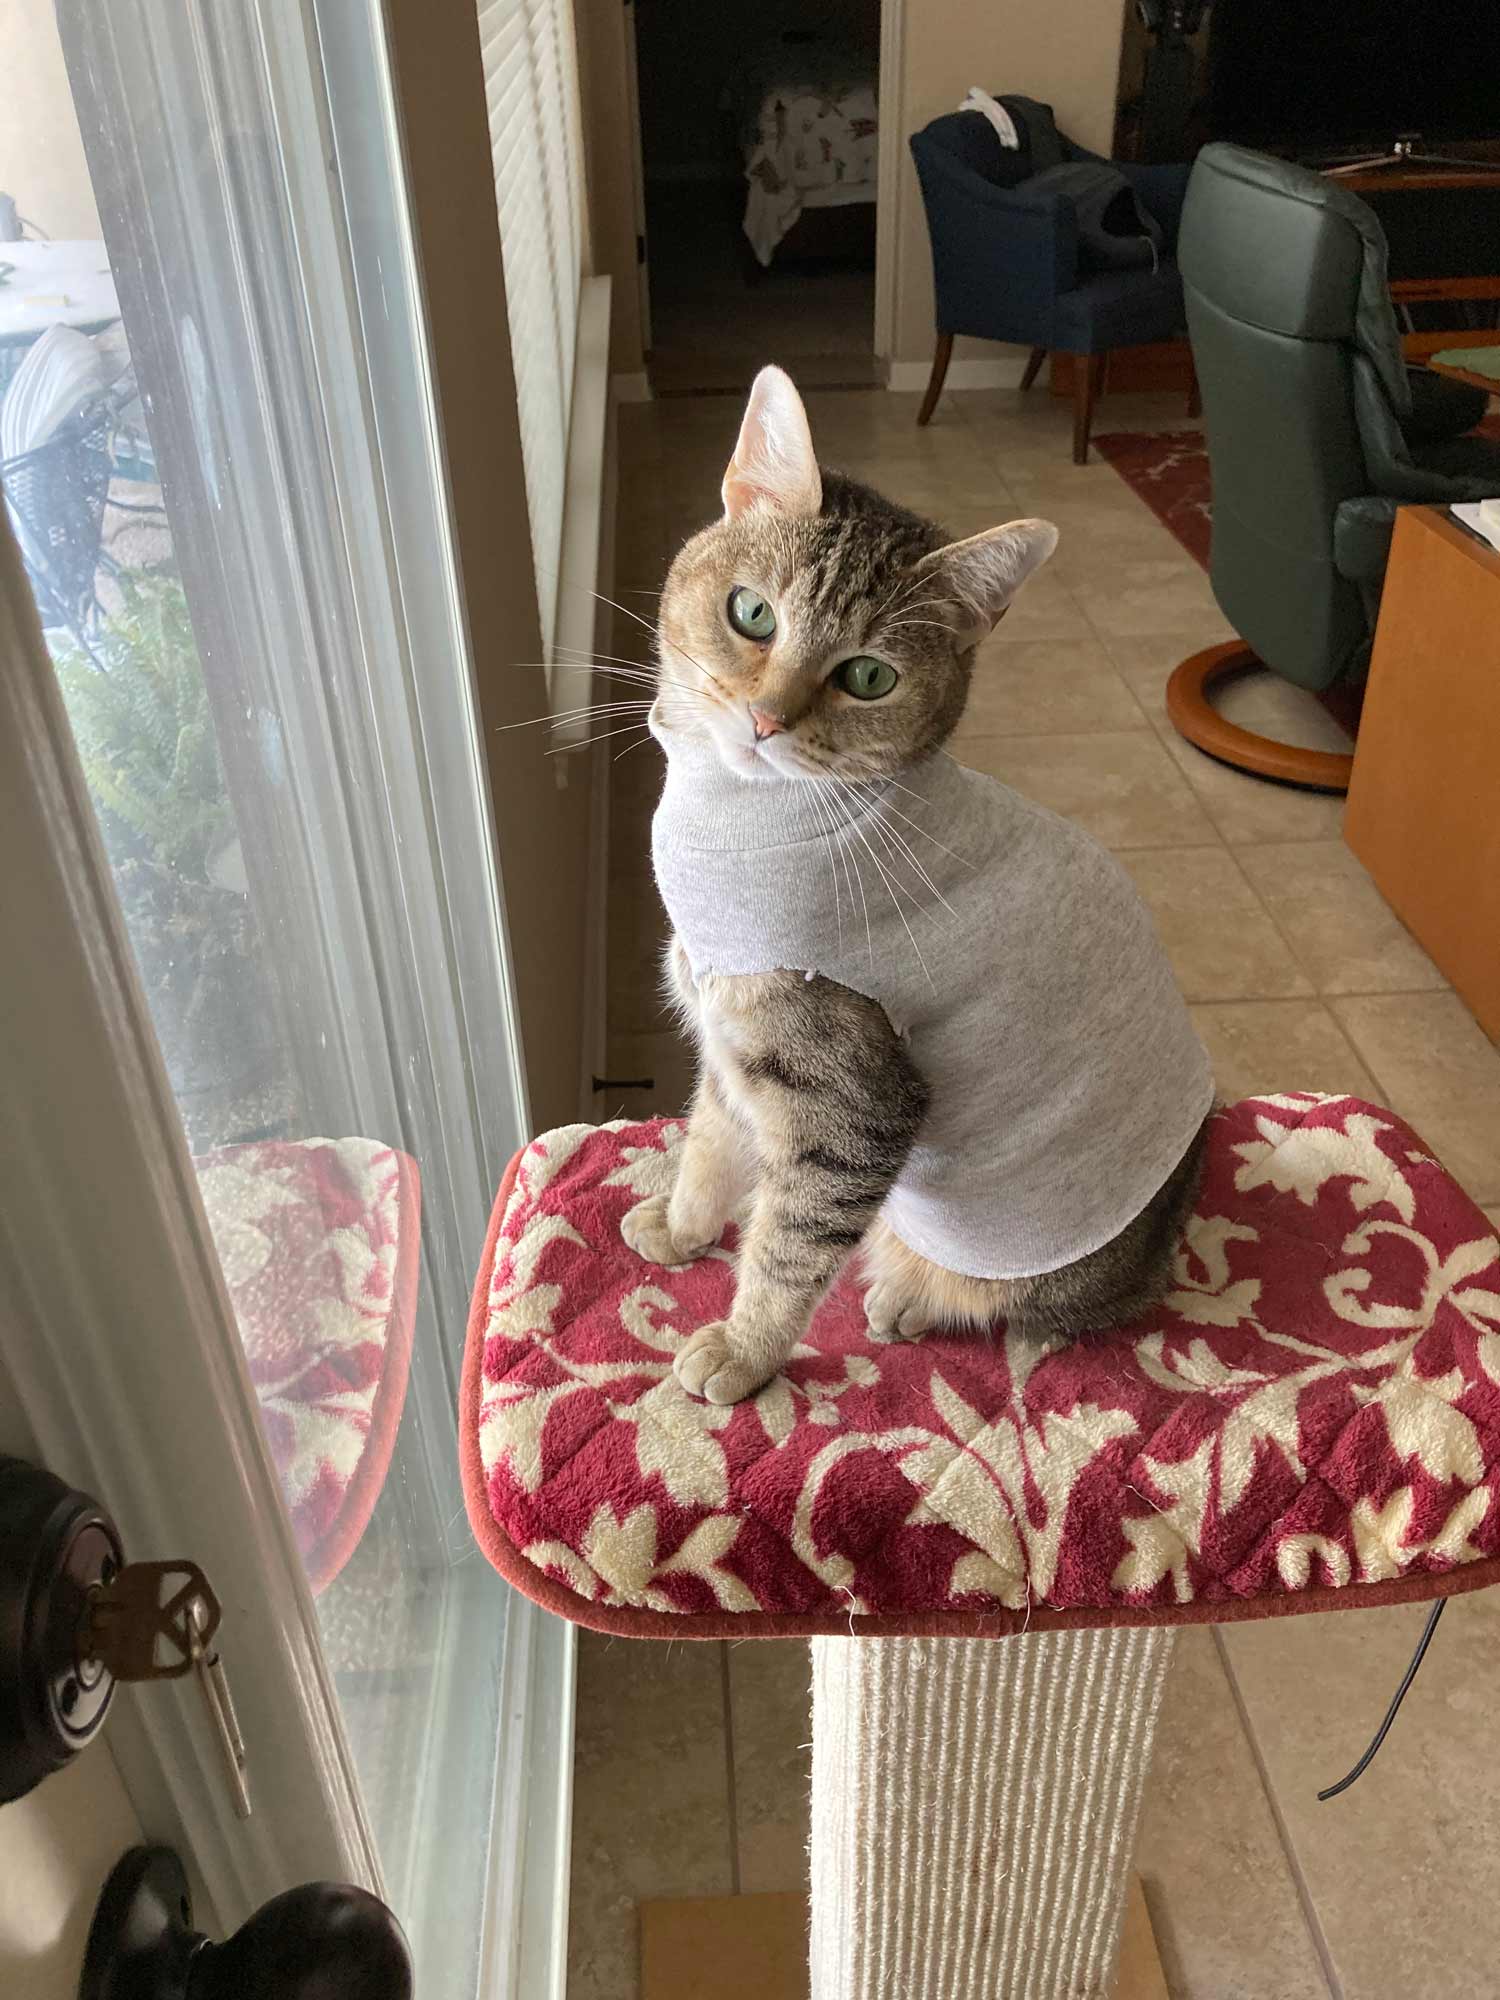 Meet Abby the Tabby, perched and ready for bird watching in her cute sweater. A cat in clothes!